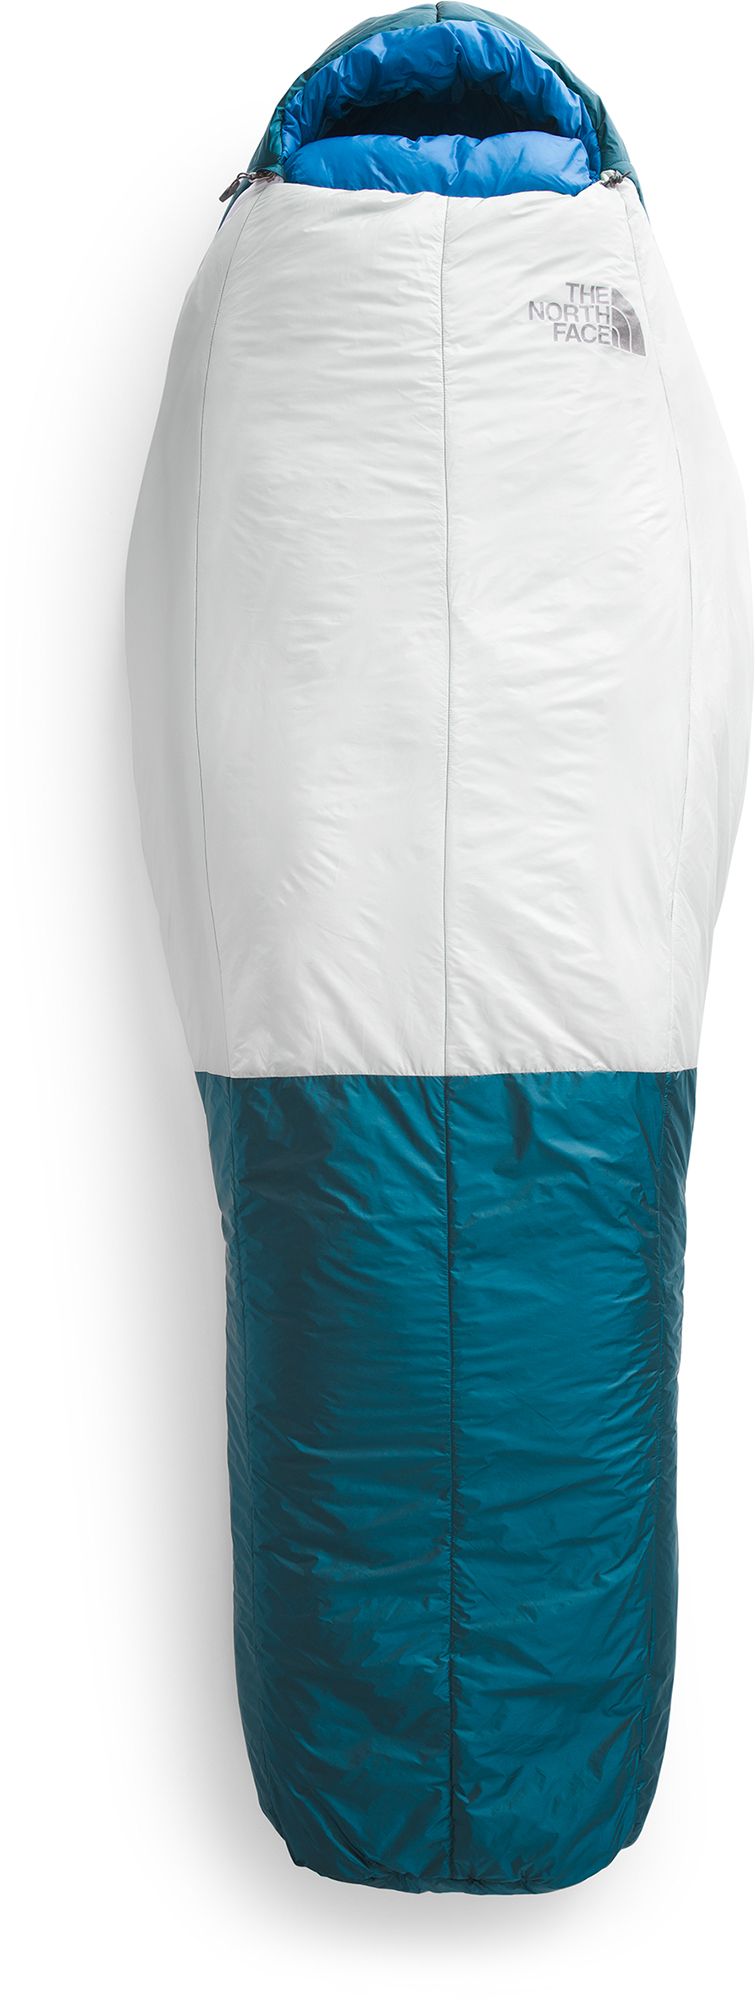 Photos - Suitcase / Backpack Cover The North Face Cat's Meow 20 Sleeping Bag, Men's, Long, Banff Blue/Tin Gre 